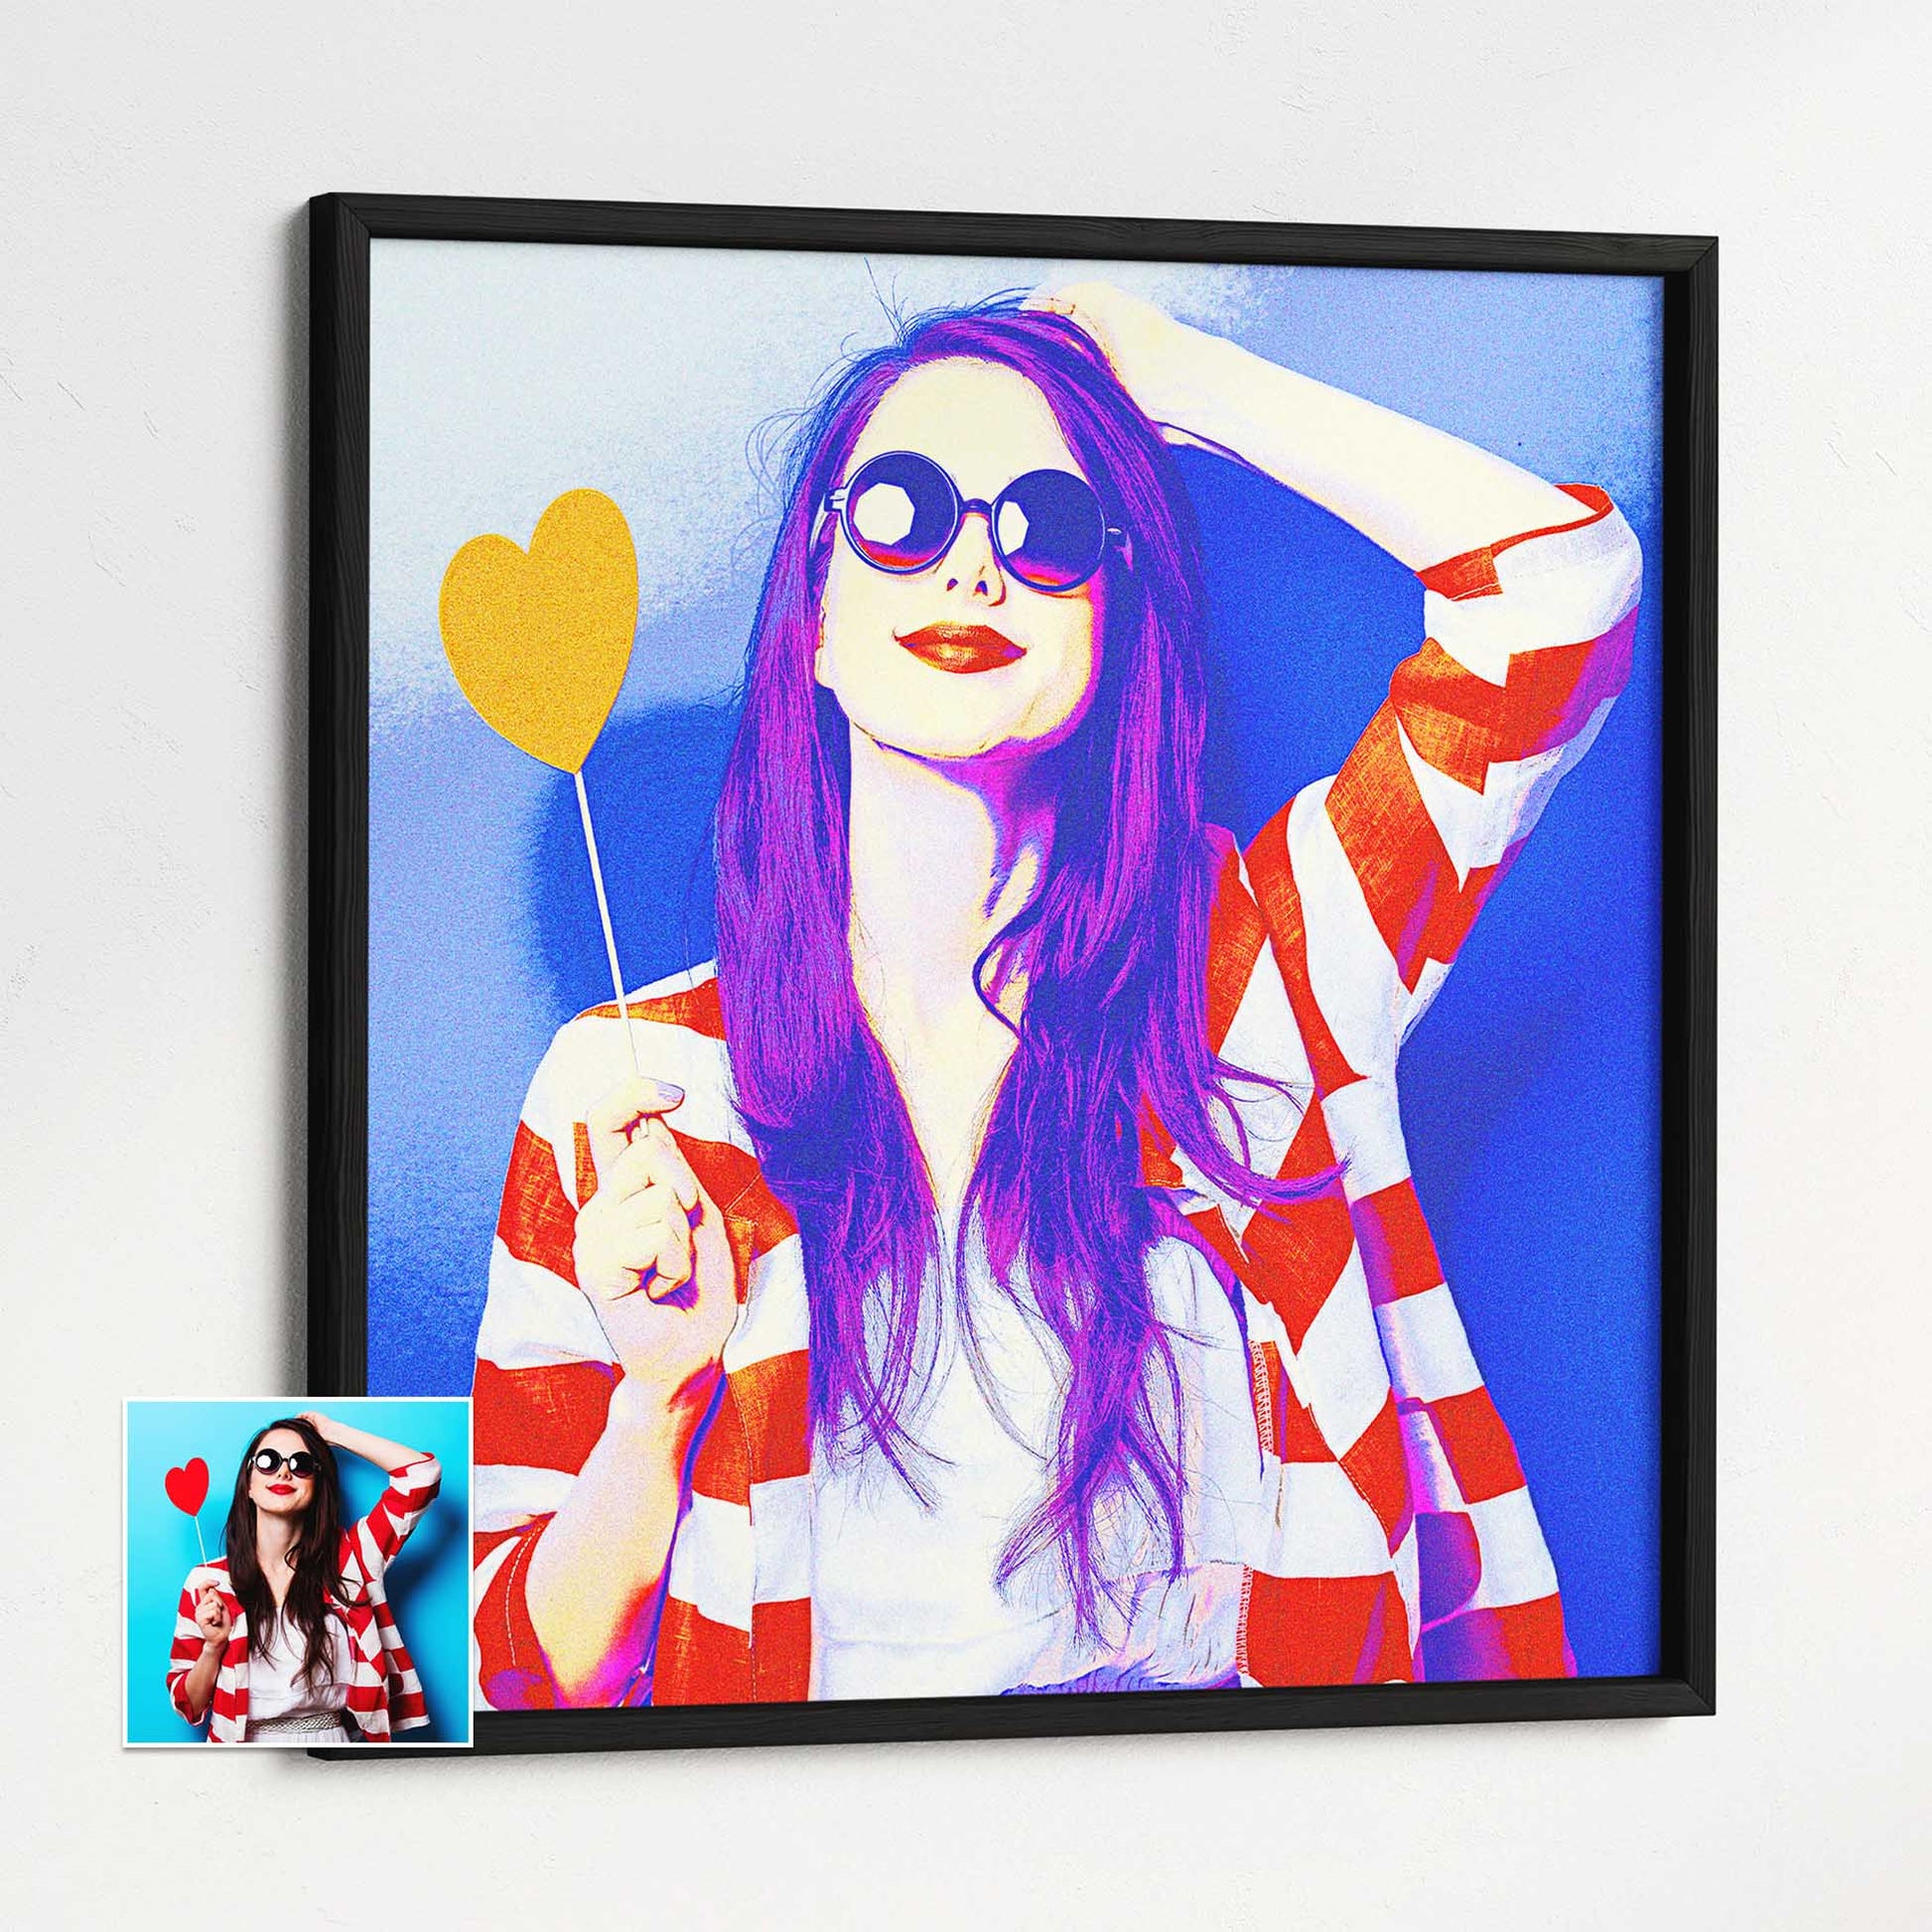 Make a bold and creative statement with the Personalised Blue & Purple Framed Print. Its fun and vibrant colors, printed from your photo, bring a full energy and lively vibe to your space, sharp and vivid details